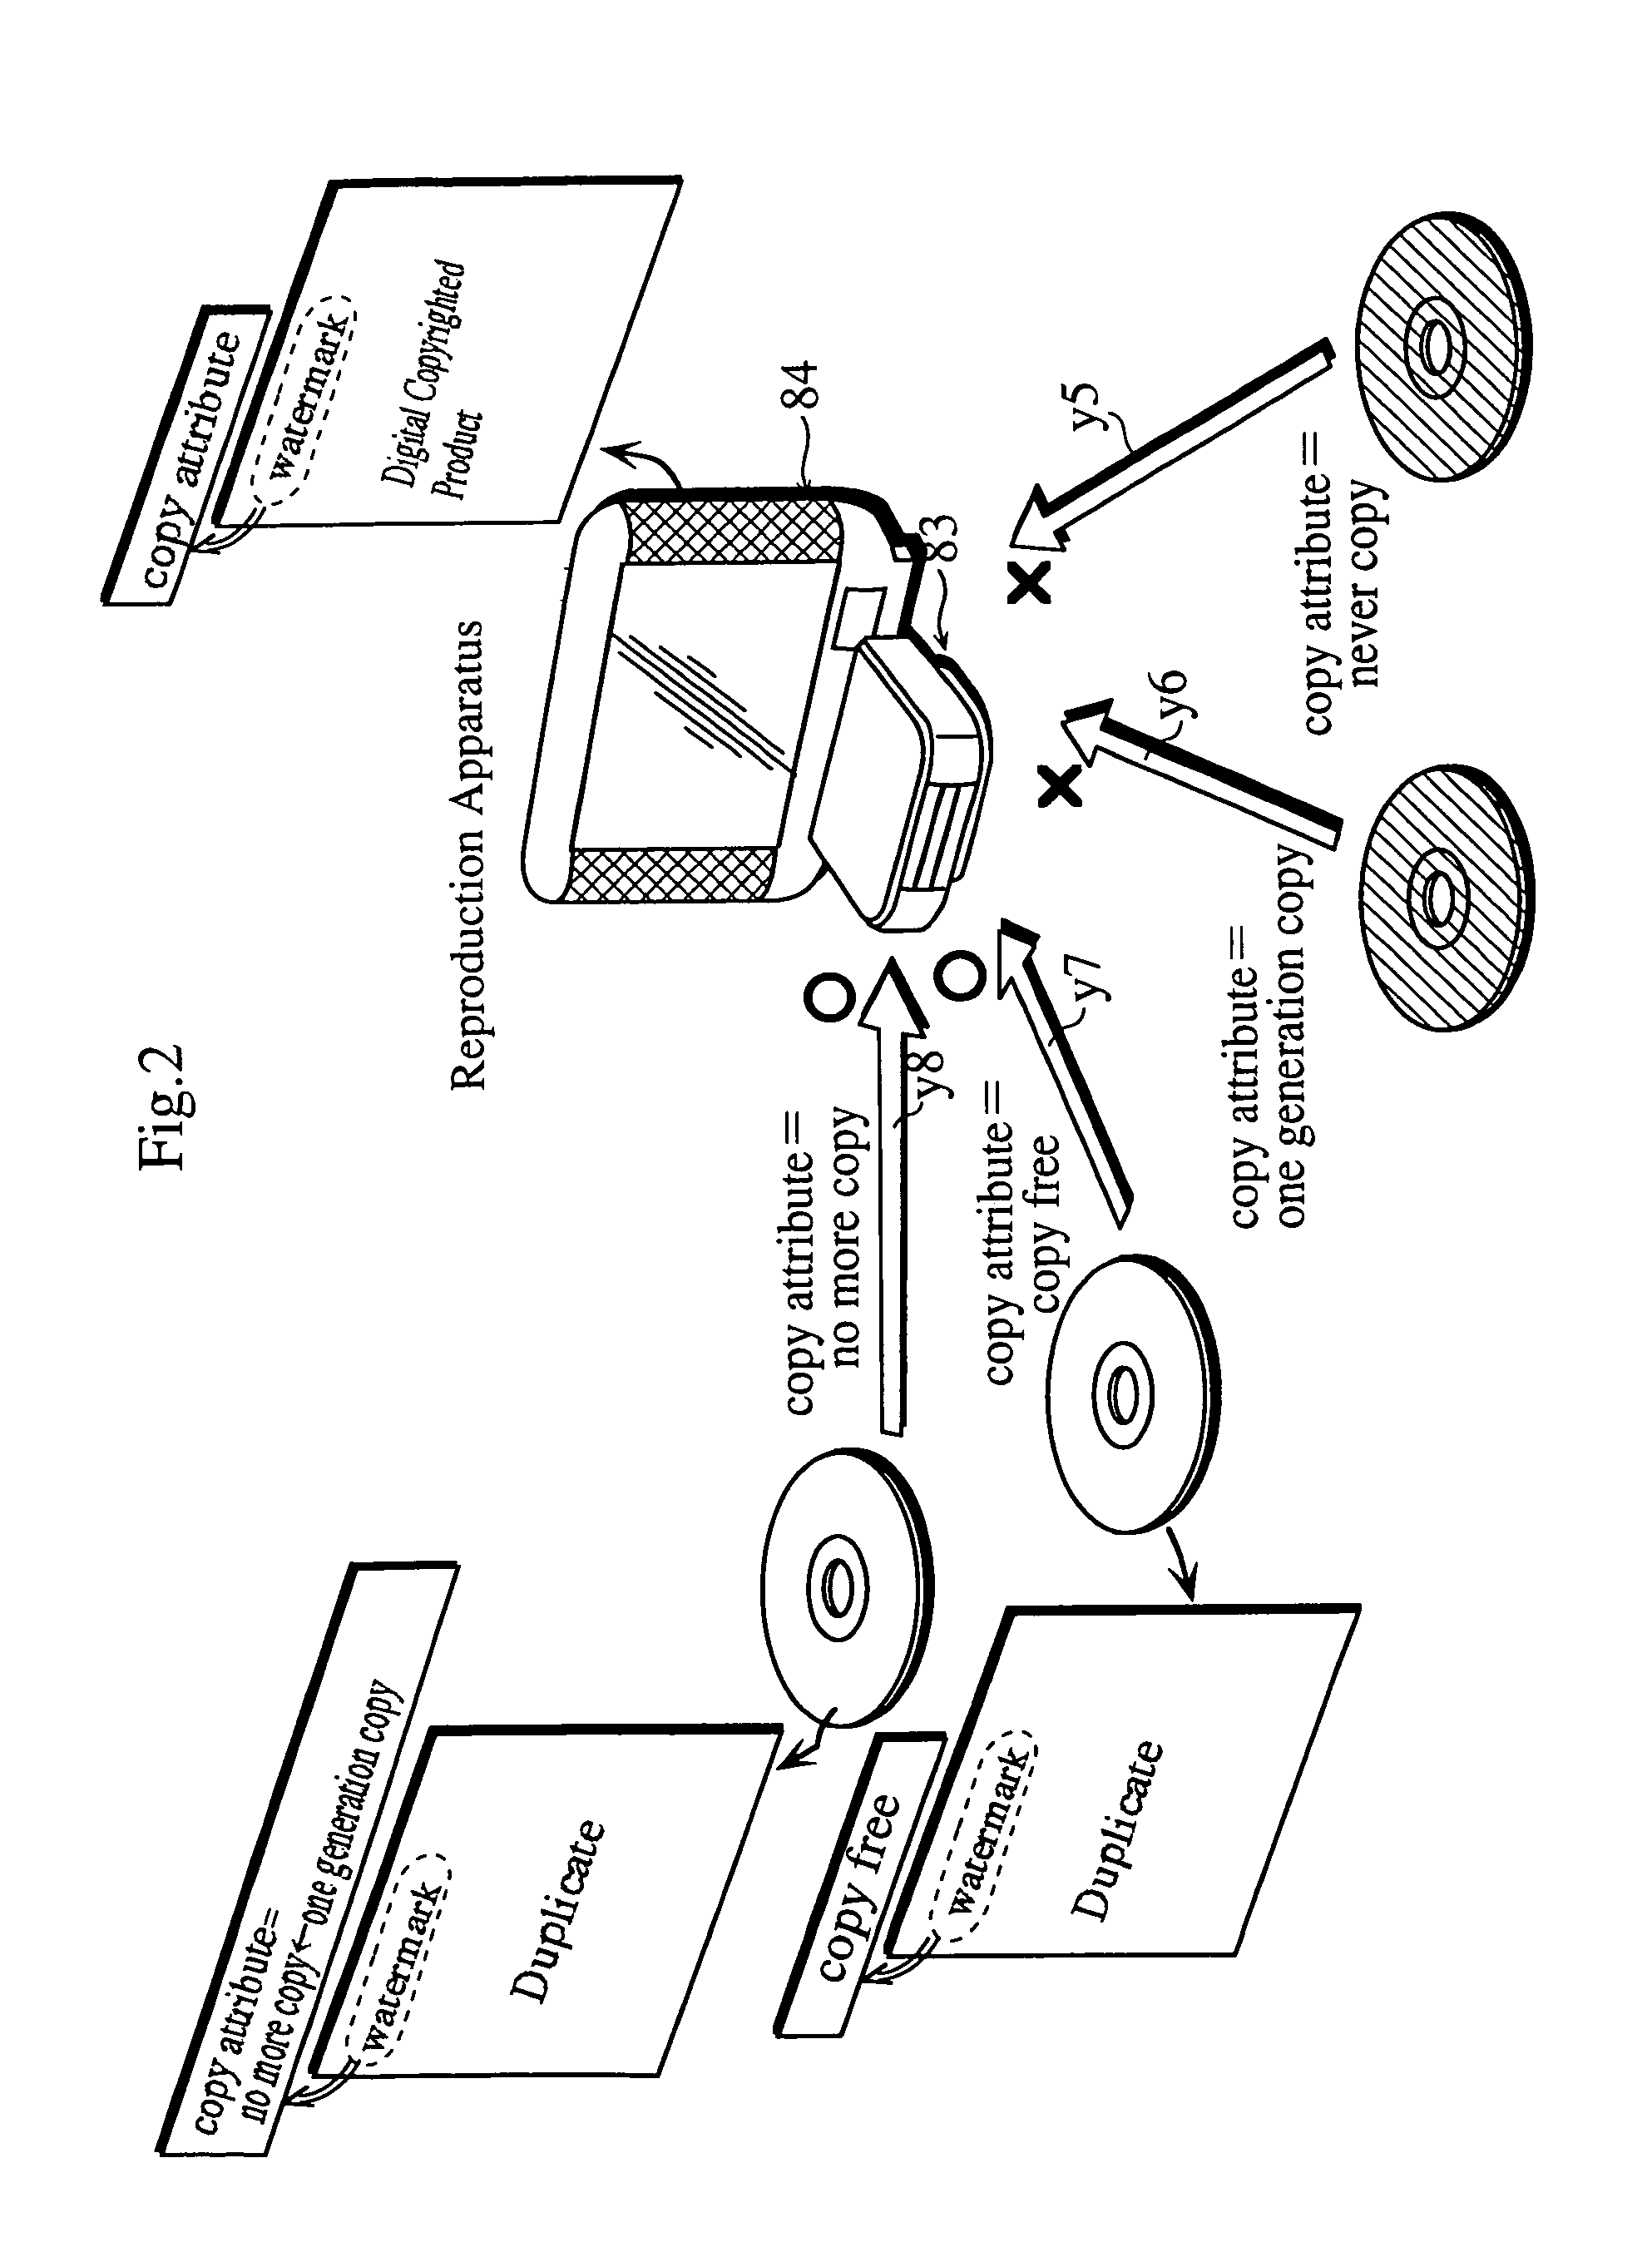 Recorder for recording copy of production on the basis of copy attribute embedded as electronic watermark in the production, reproducing device for reproducing recorded copy, recorded medium, recording method, and reproducing method